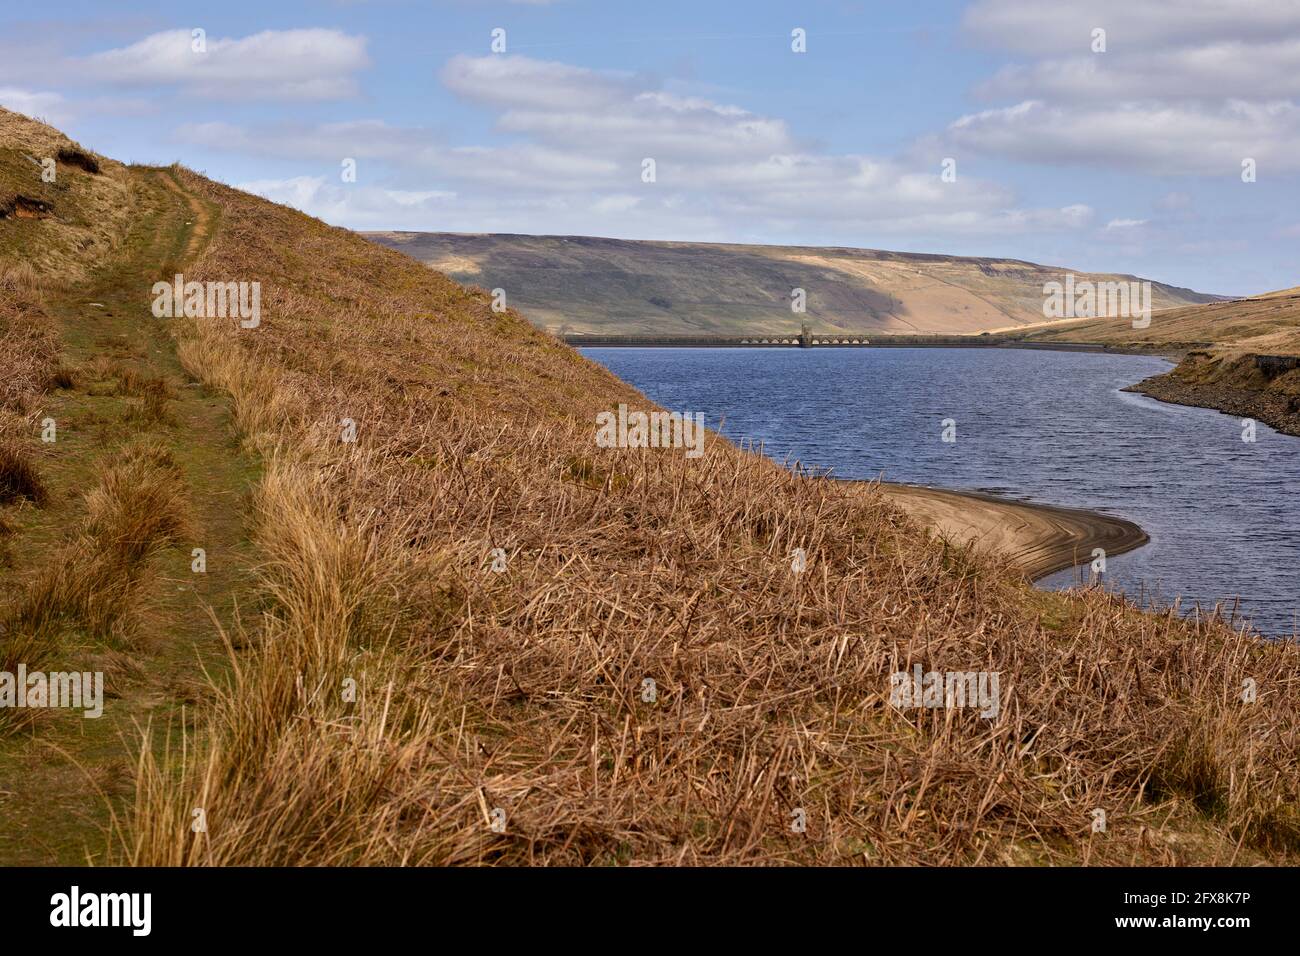 Views from the head of Angram Reservoir Stock Photo